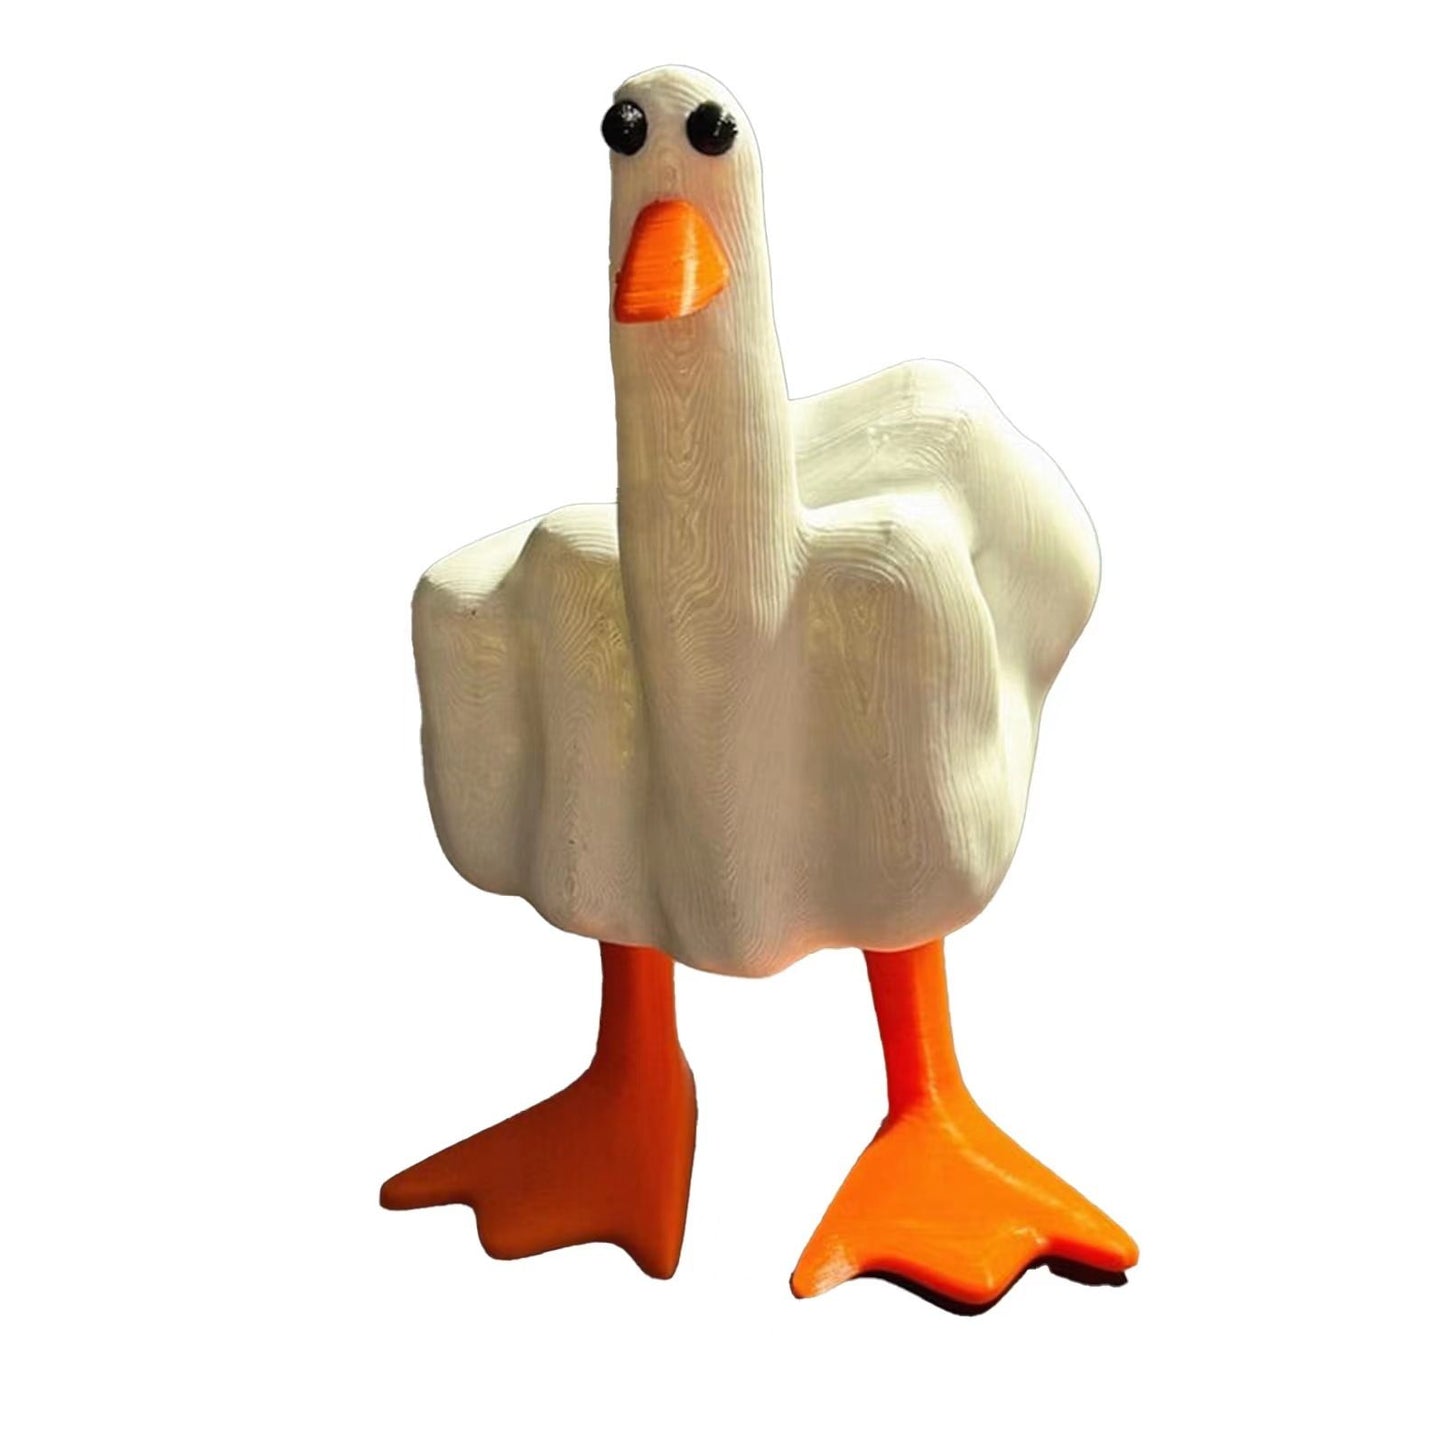 Middle Finger Duck Figurines Ornament Resin Duck Figurine Middle Figurine Finger Crafts Ornaments for Home Garden Decoration